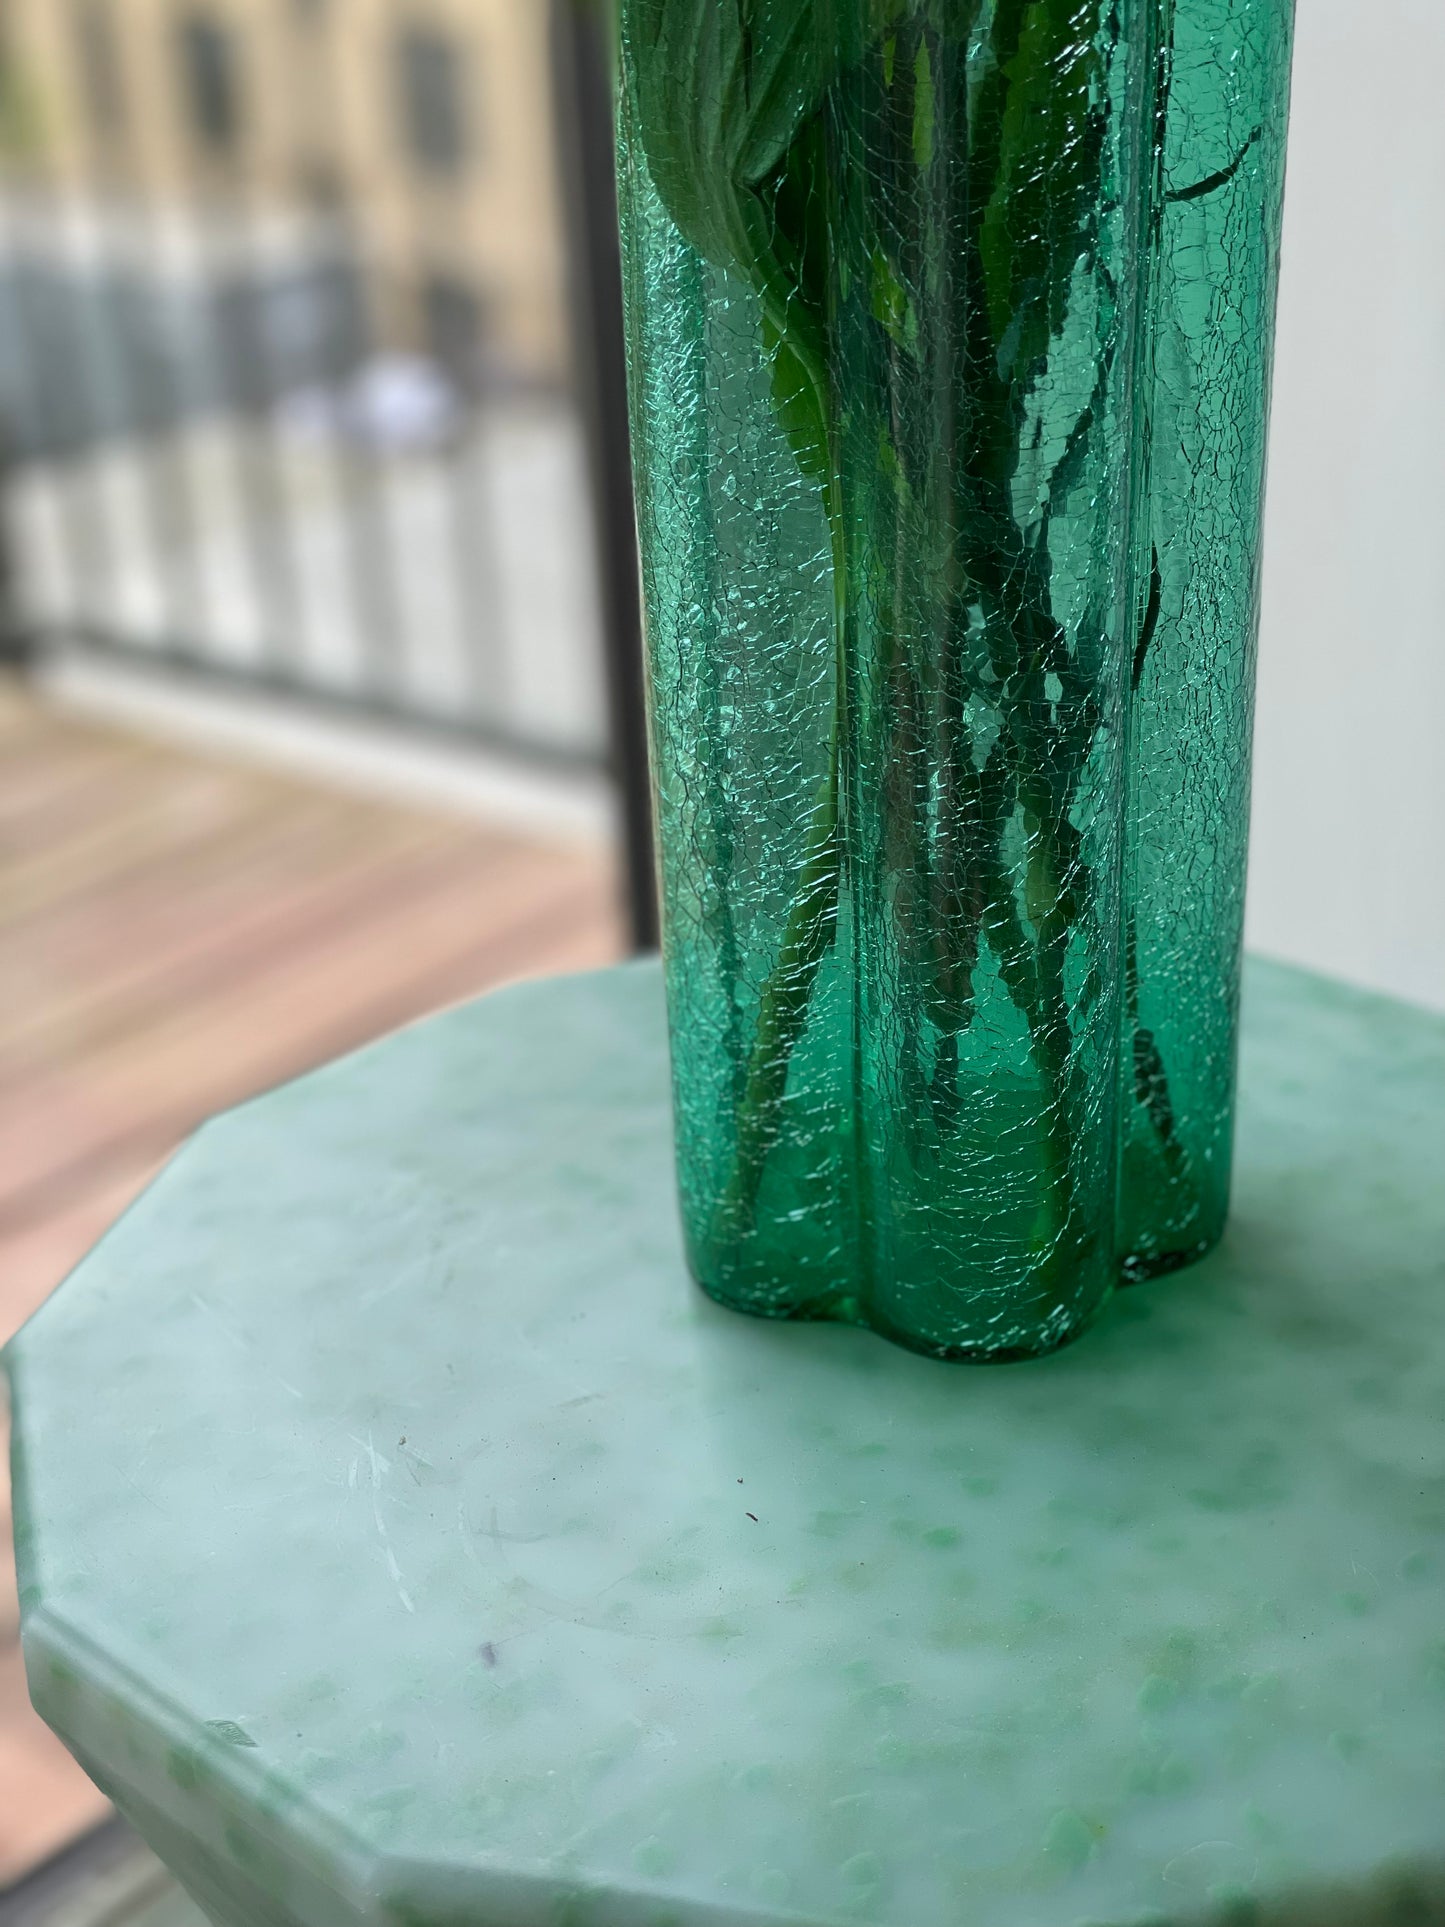 Glass vase in 'cracked' green glass